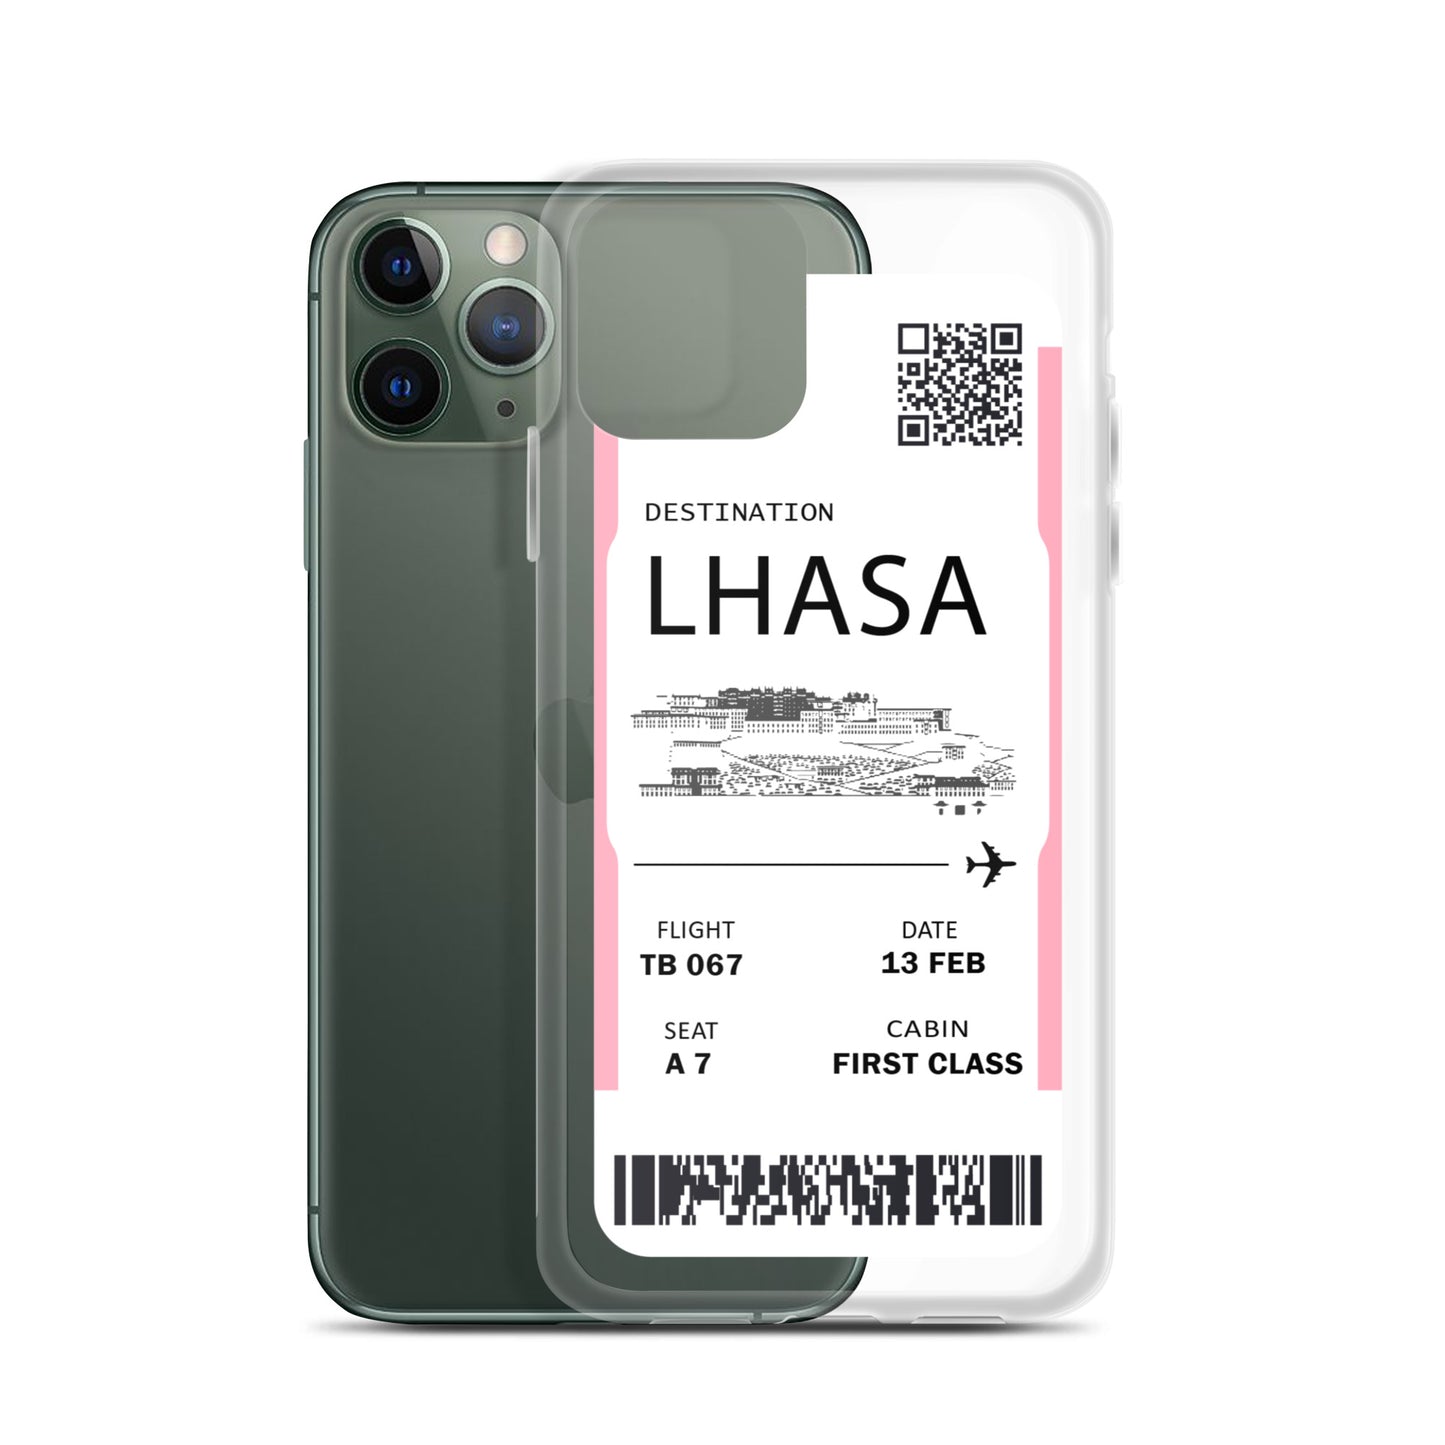 Lhasa Boarding iPhone case - Premium Clear iPhone case - Lhasa flight boarding pass printed mobile case - Available in three colors - Lhasa Boarding mobile cas